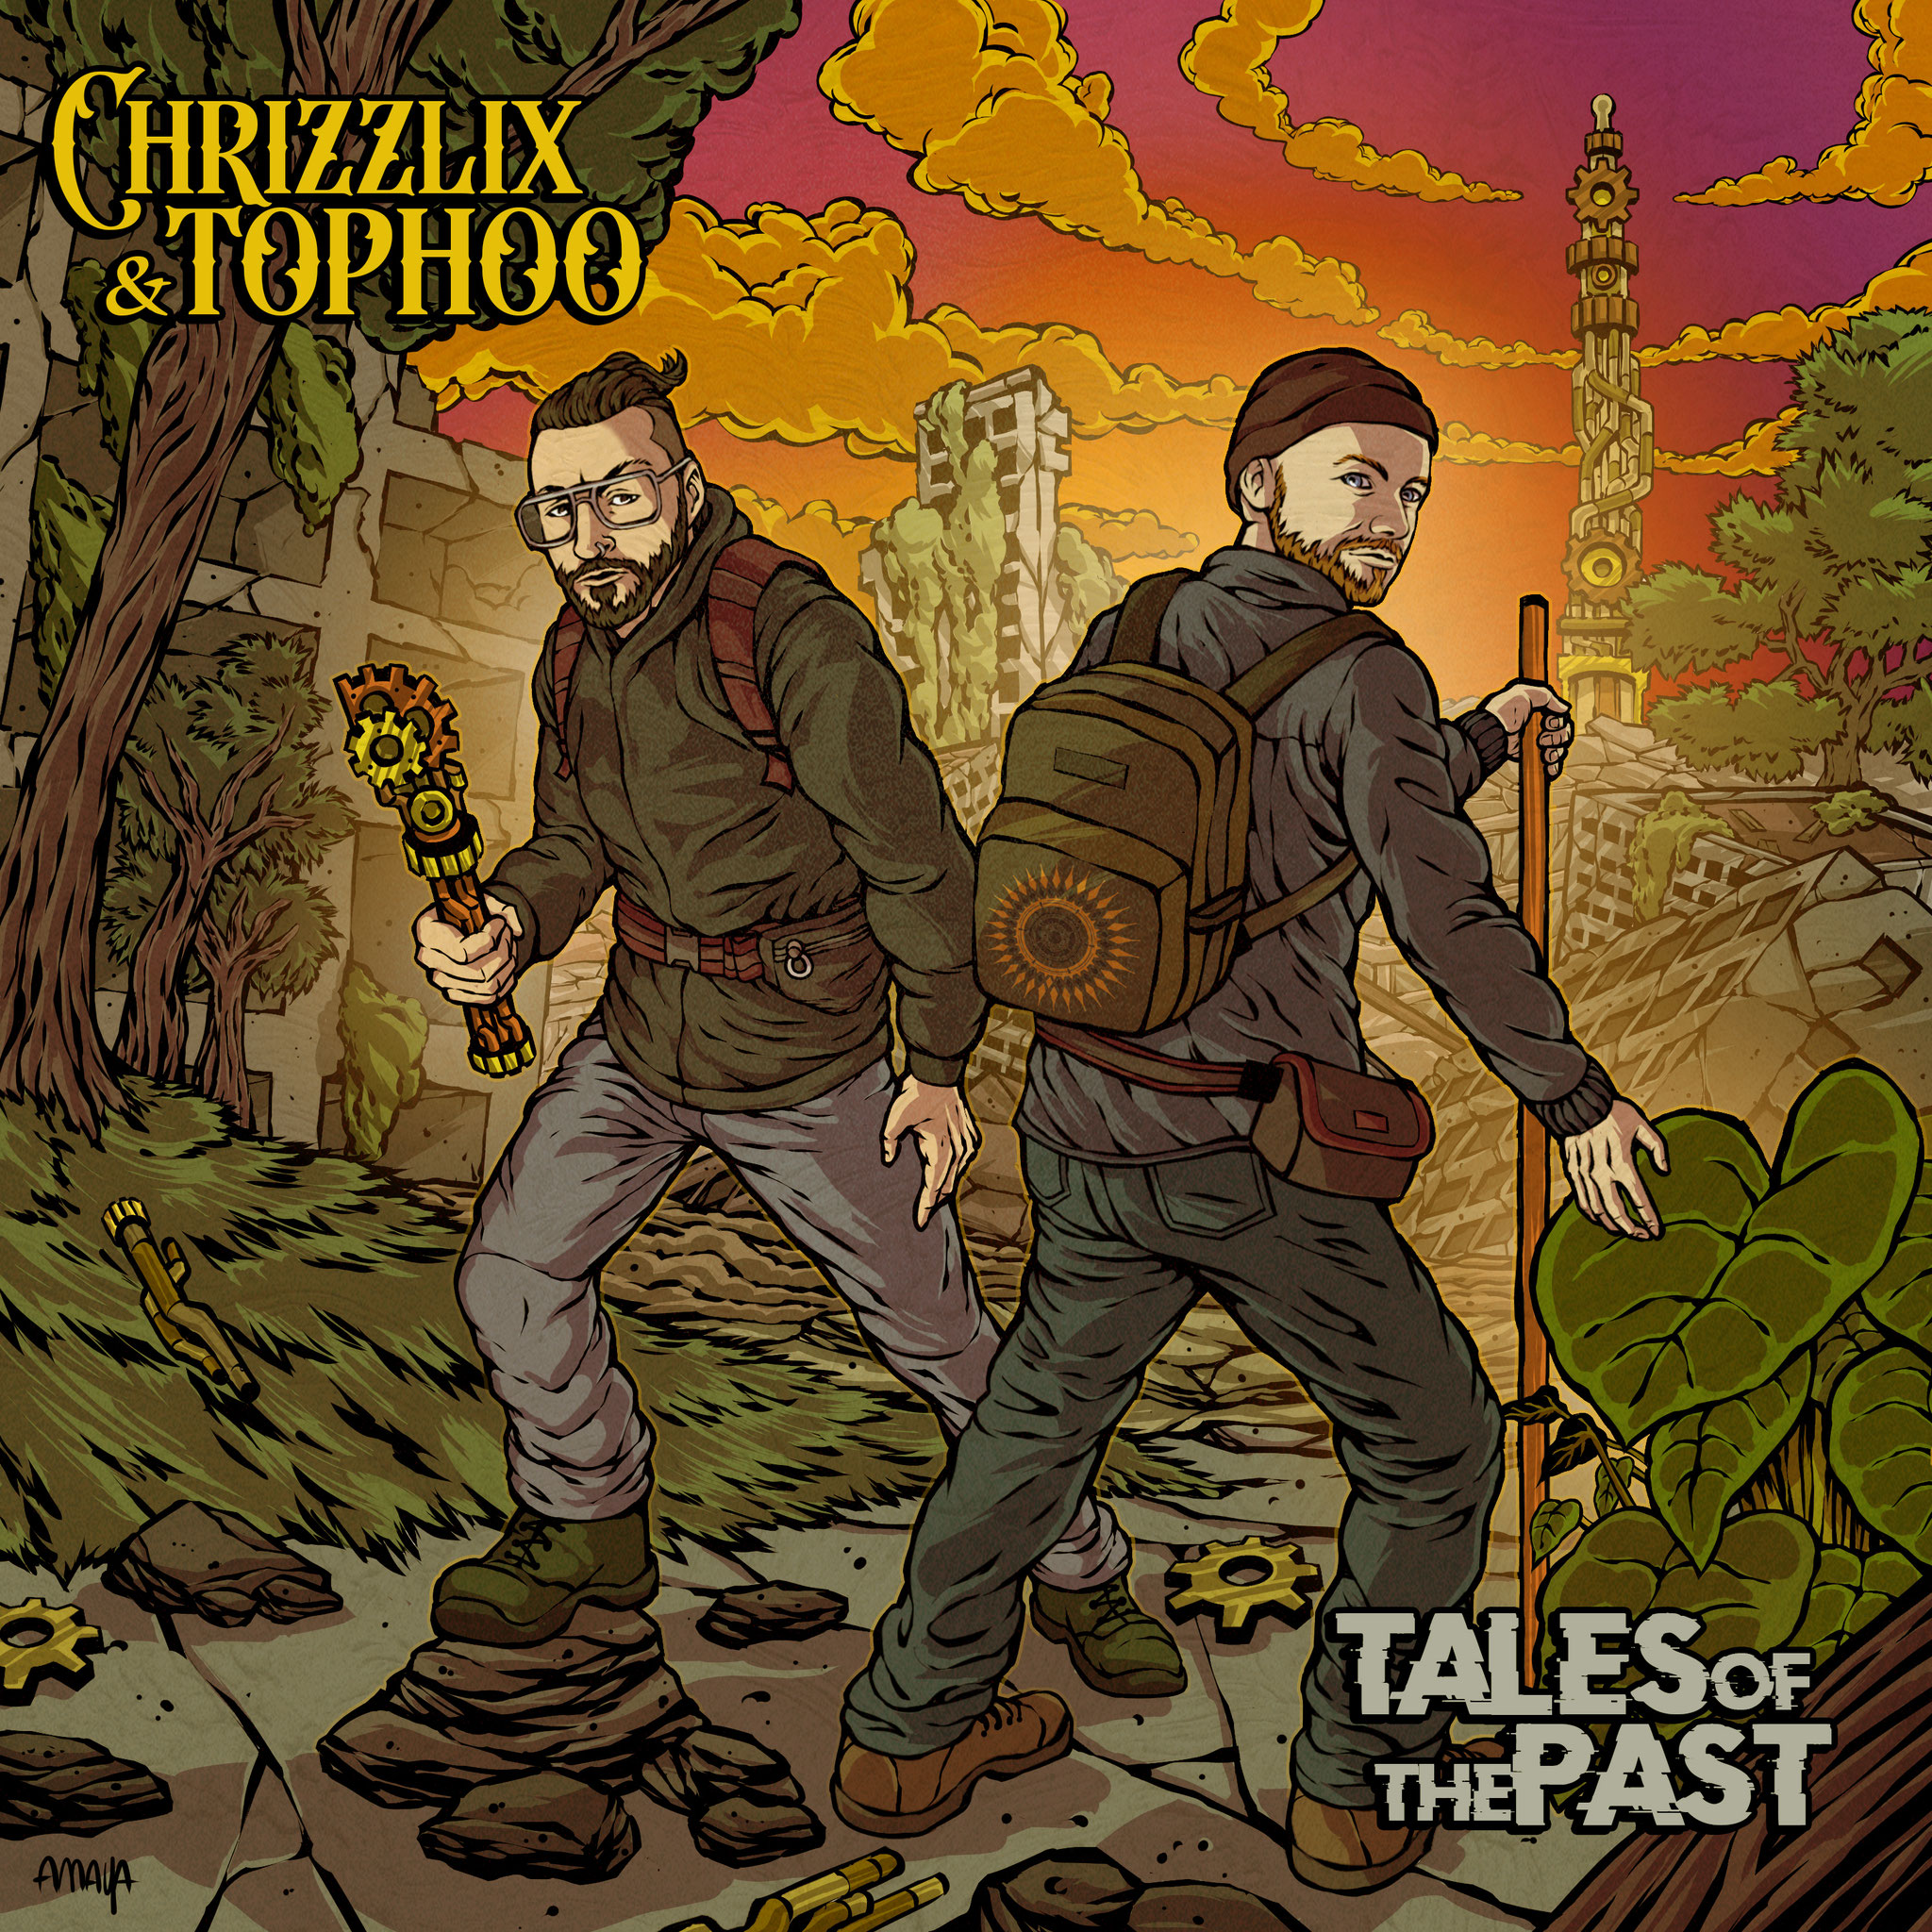 Chrizzlix & Tophoo - Tales of the Past